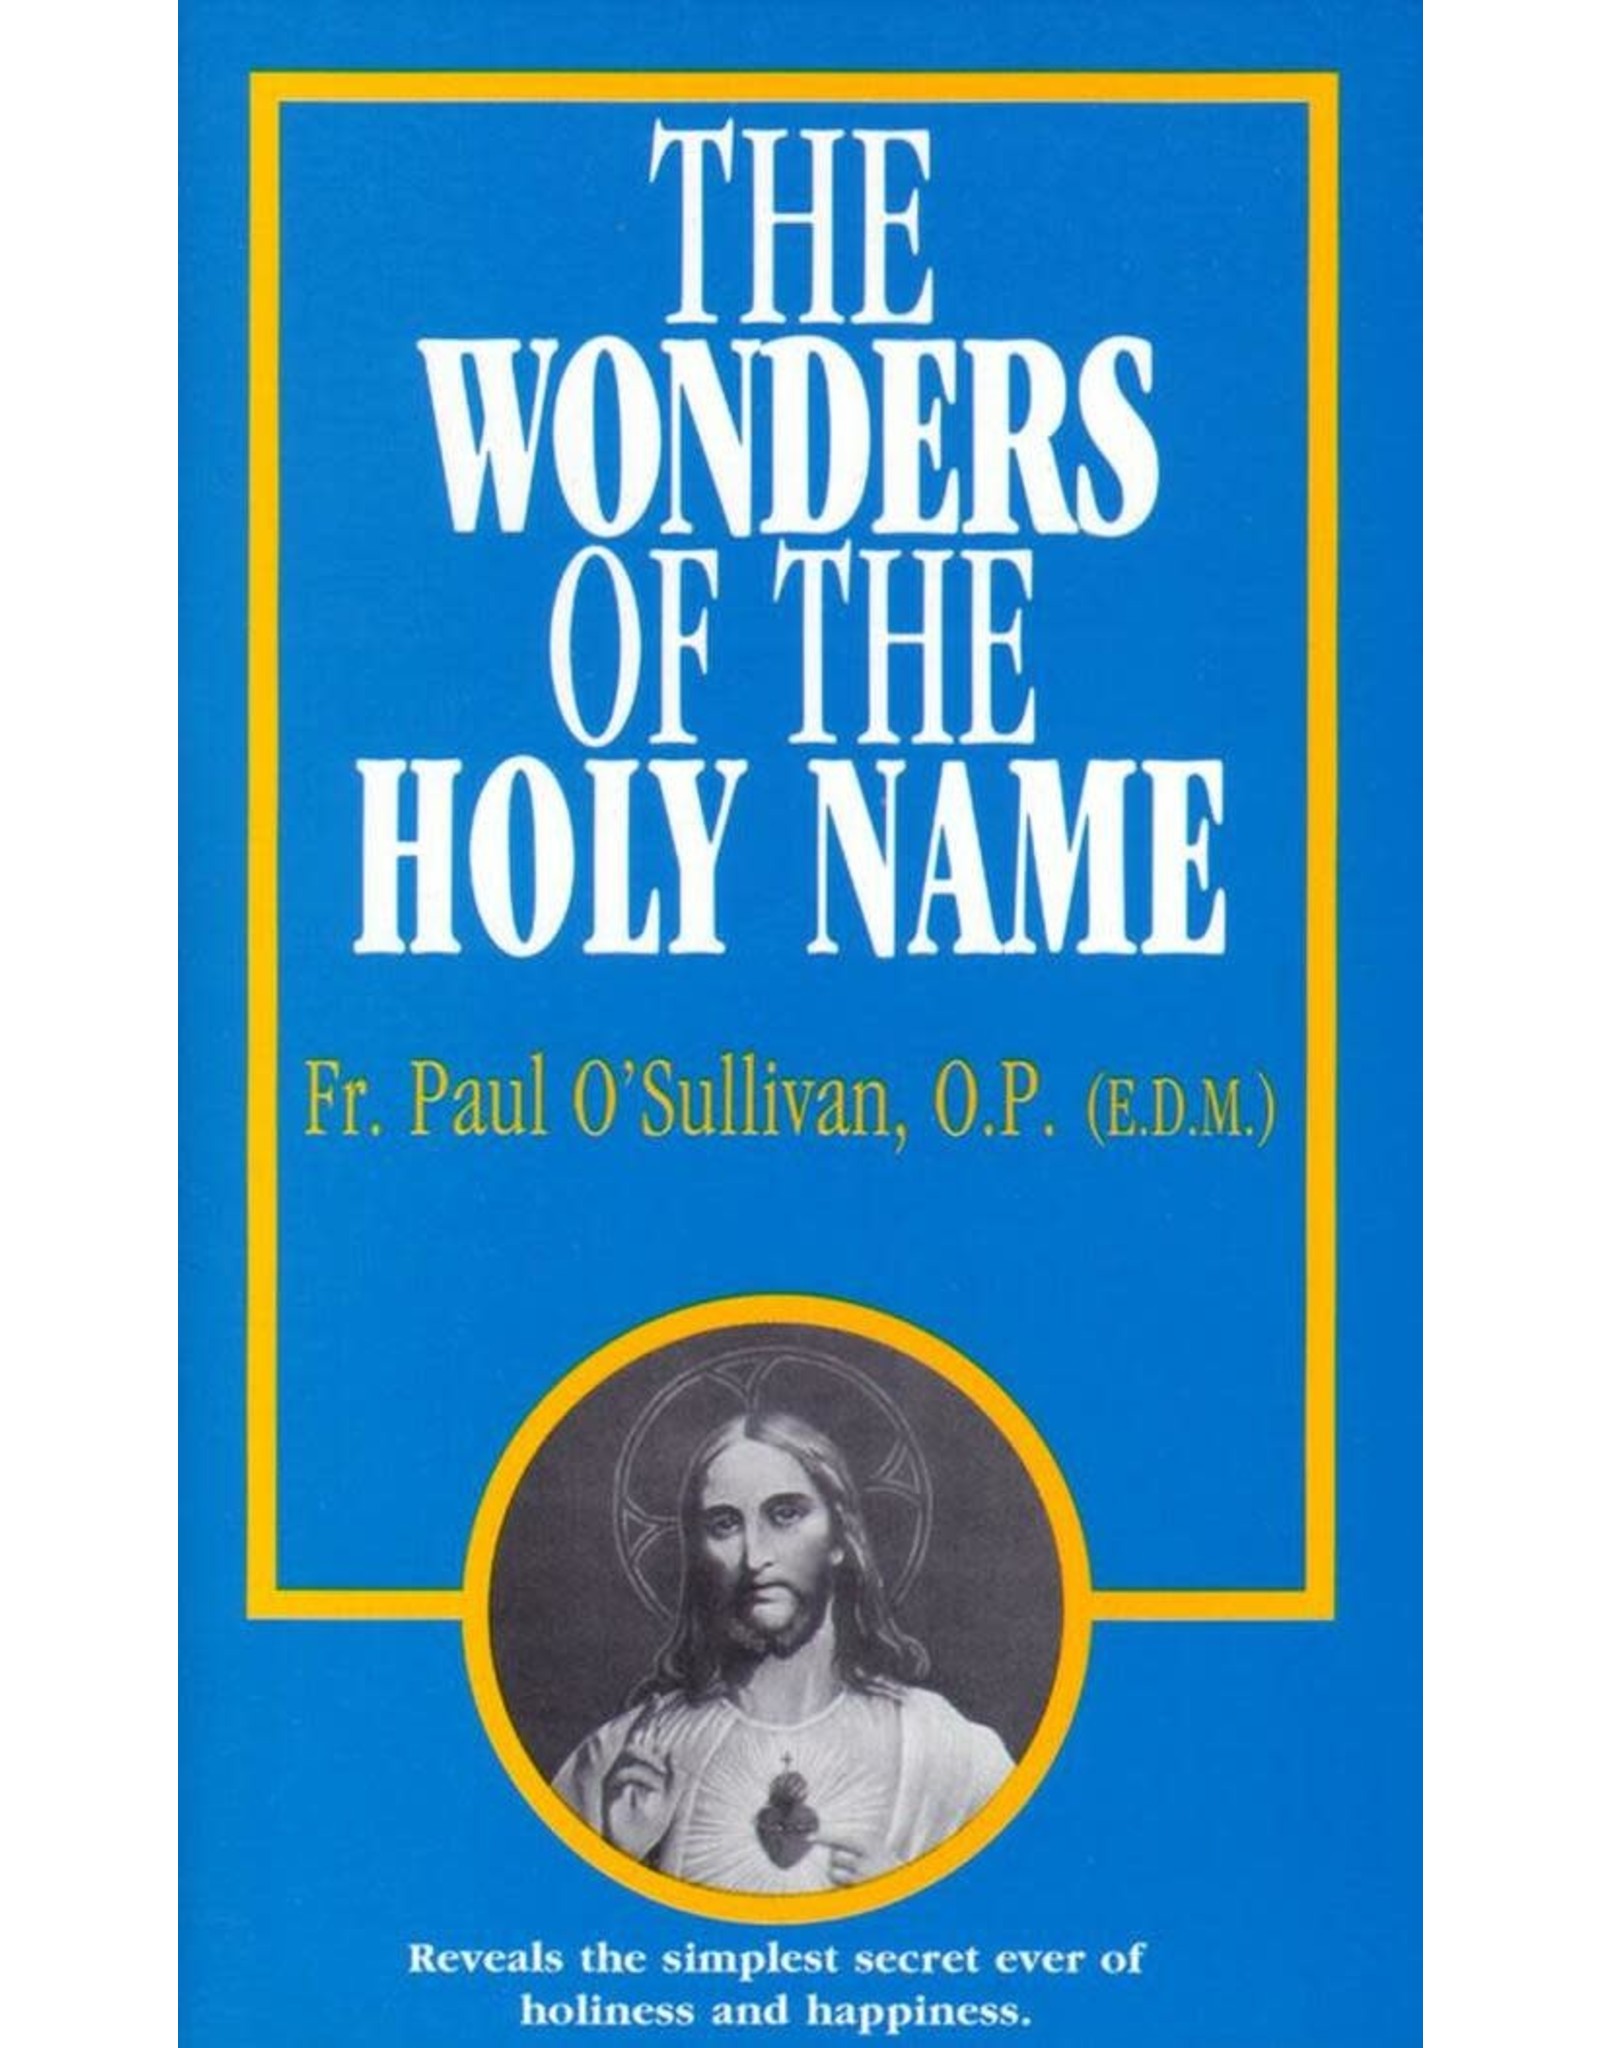 Tan Books The Wonders Of The Holy Name by Rev. Fr. Paul O'Sullivan, O.P. (E.D.M.) (Booklet)